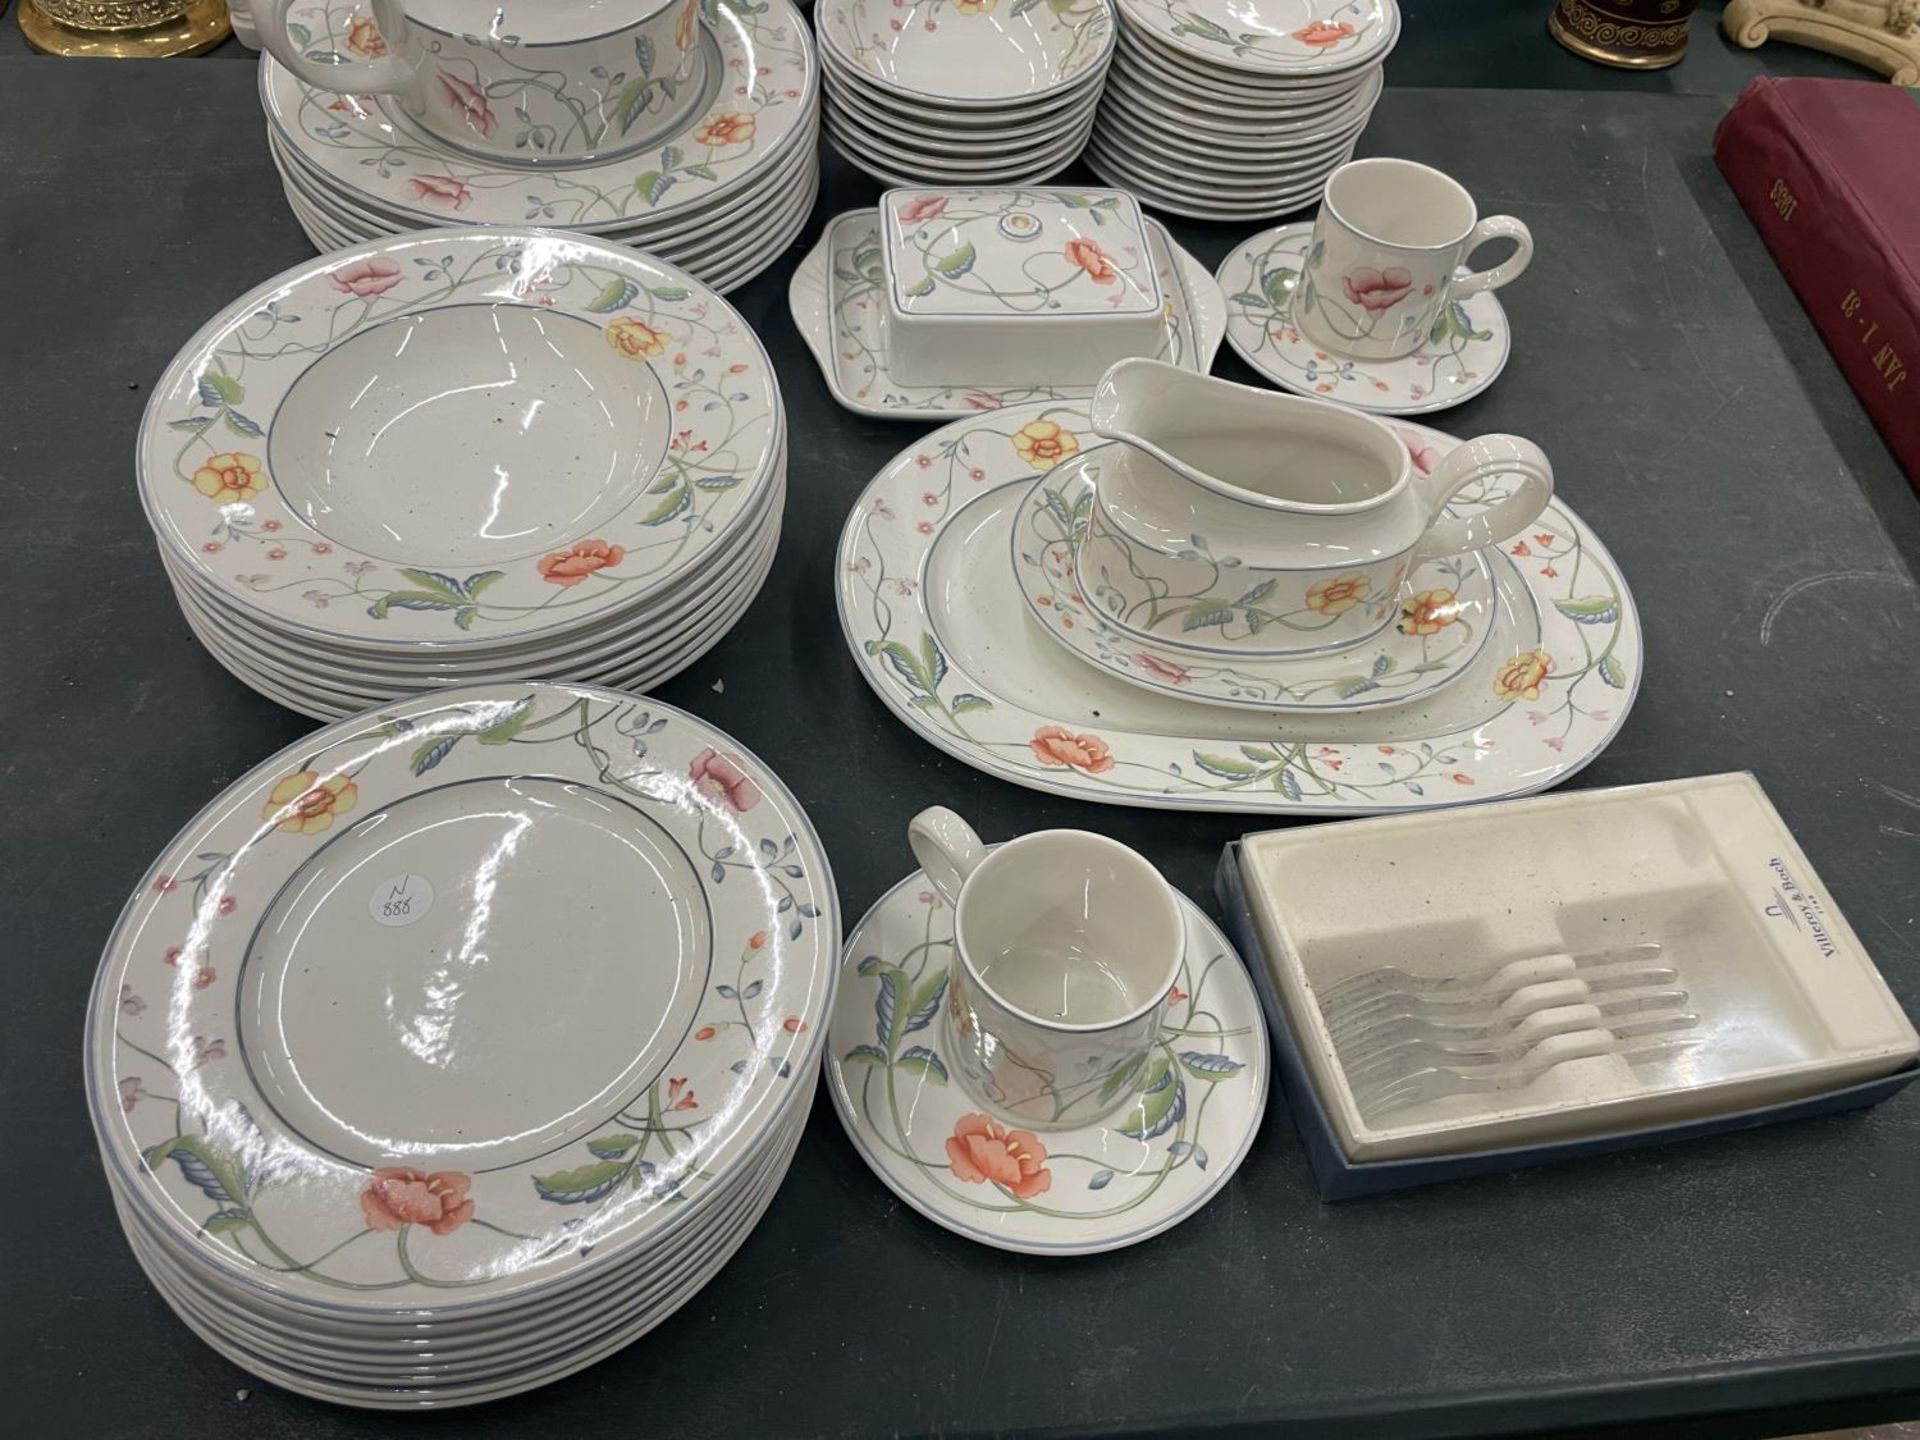 VARIOUS VILLEROY AND BOSH ALBERTINA DINNERWARE ITEMS TO INCLUDE BOWLS, PLATES, DISHES, FORKS, - Image 8 of 8